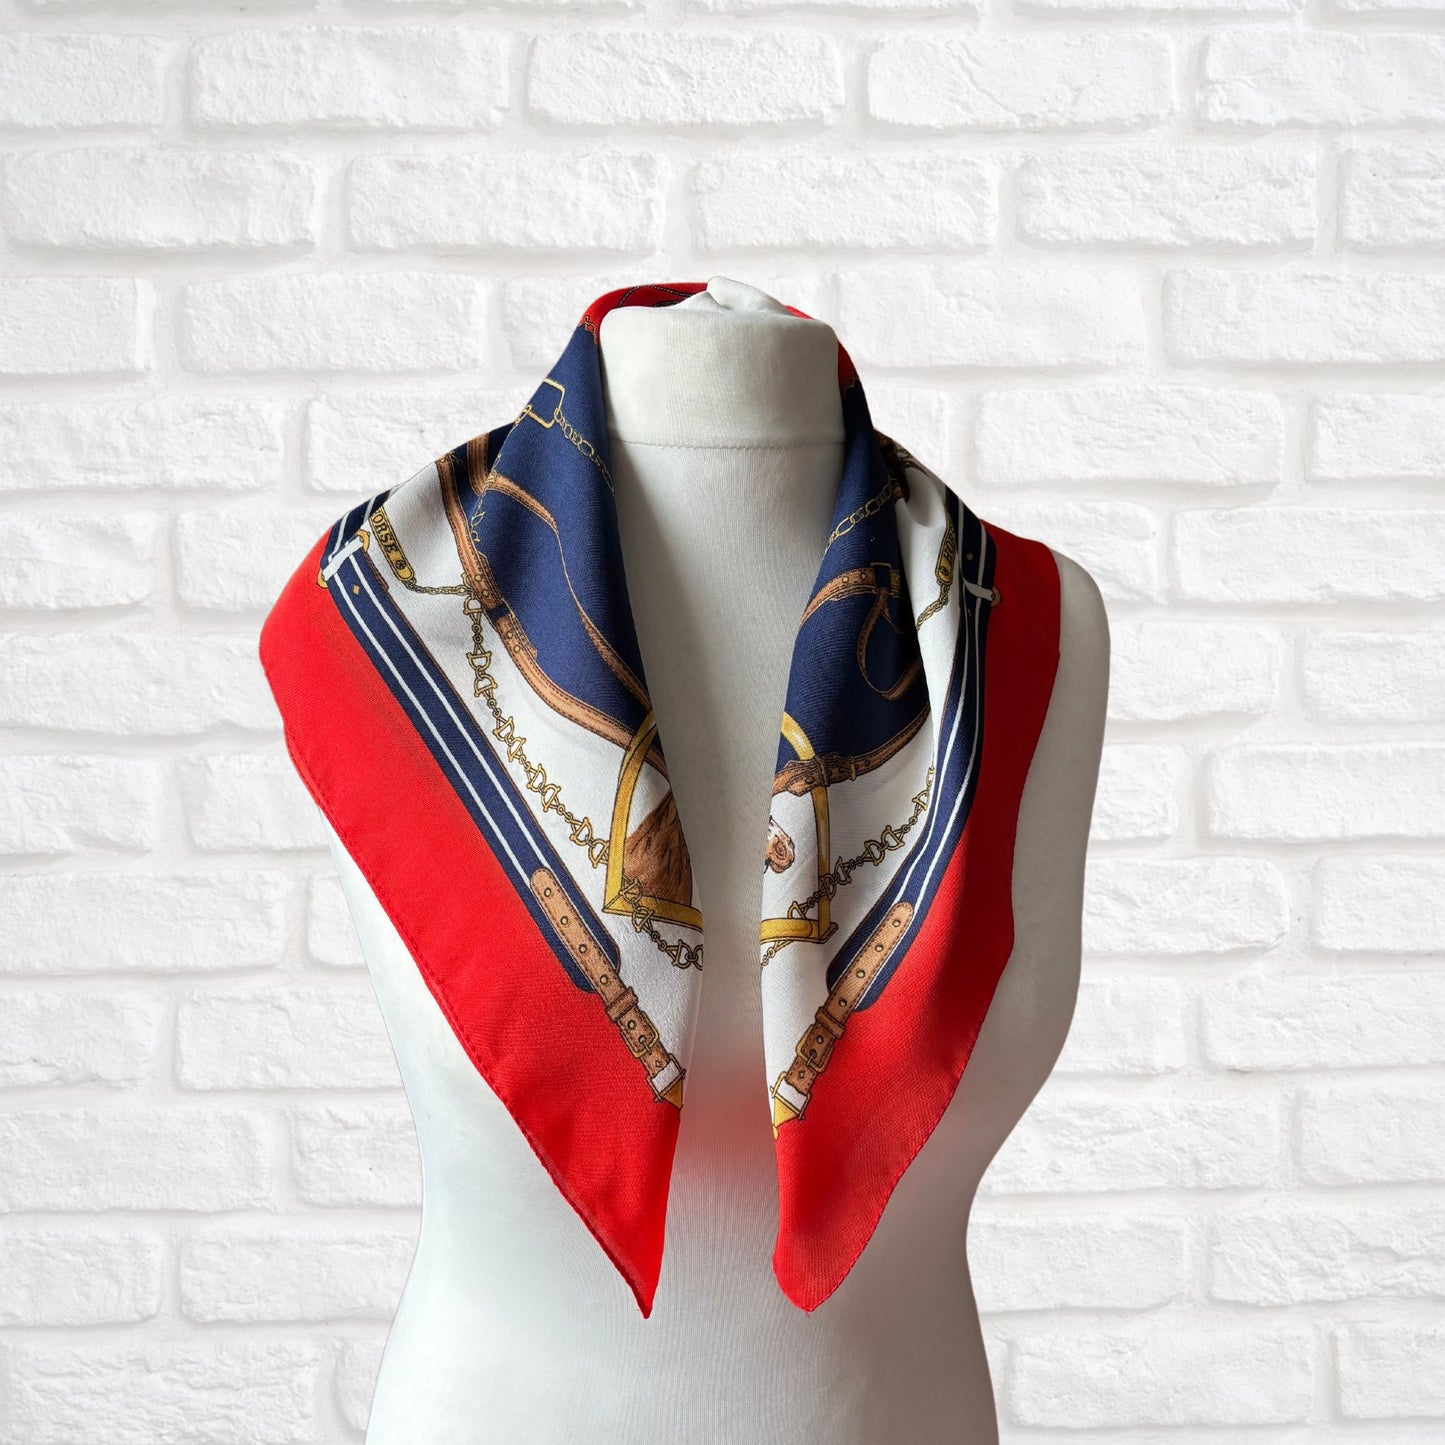 Elegant Navy Blue, Red, White , Brown and Gold Equestrian Style/Horse Design Square Vintage Scarf by Leonardi. Great Gift idea